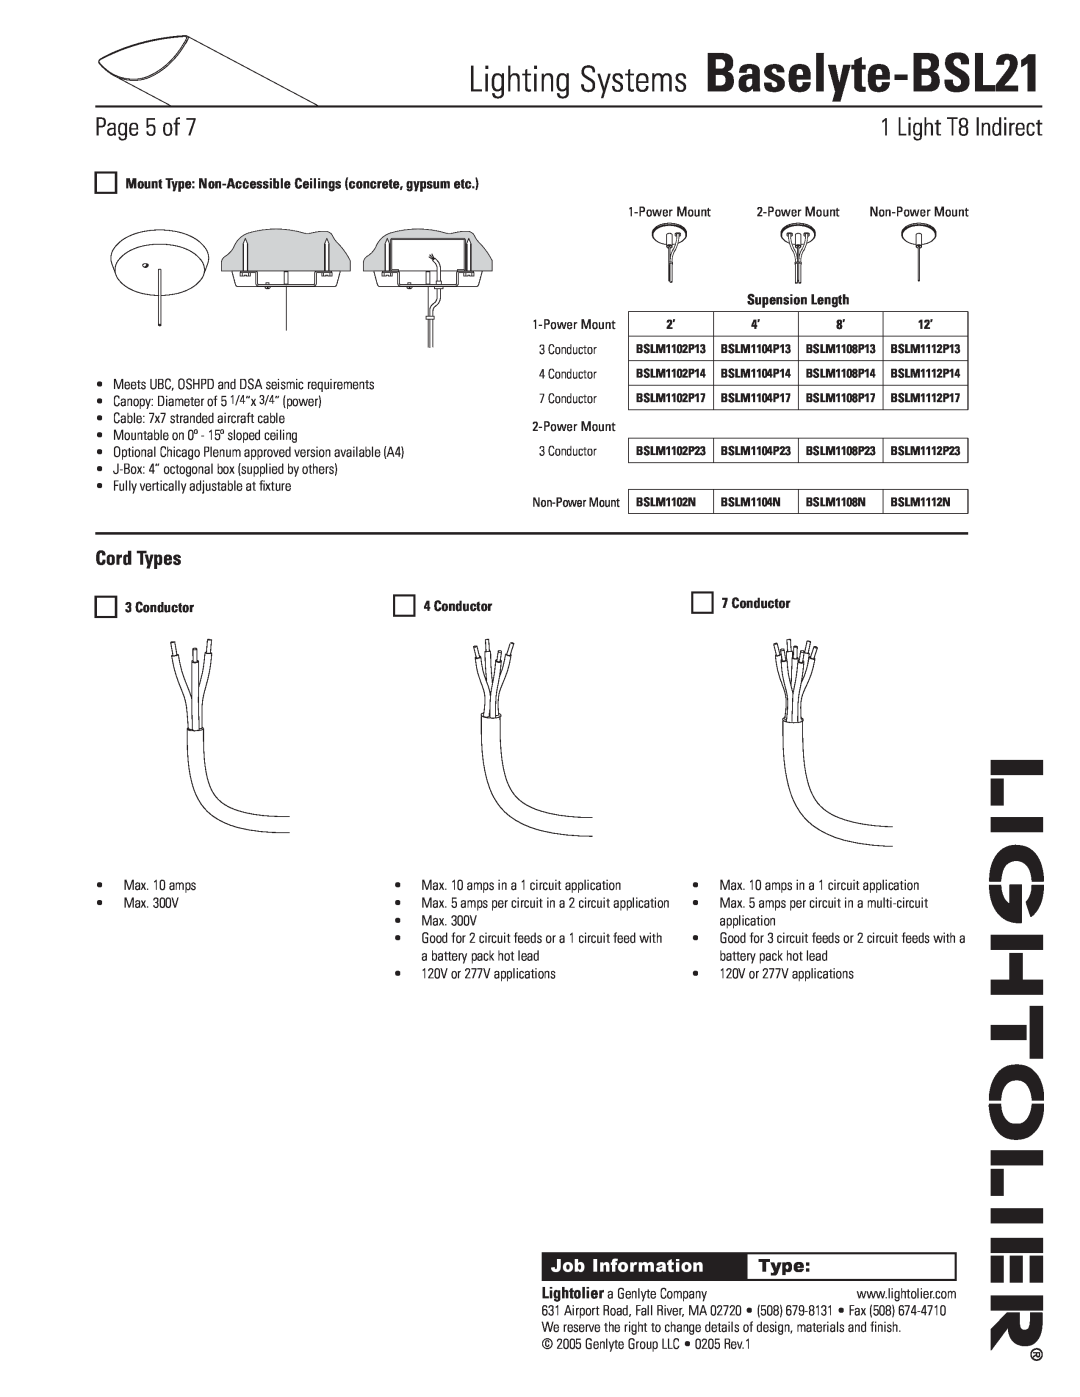 Lightolier Cord Types, Conductor, Lighting Systems Baselyte-BSL21, Page of,  Light T8 Indirect, Job Information 